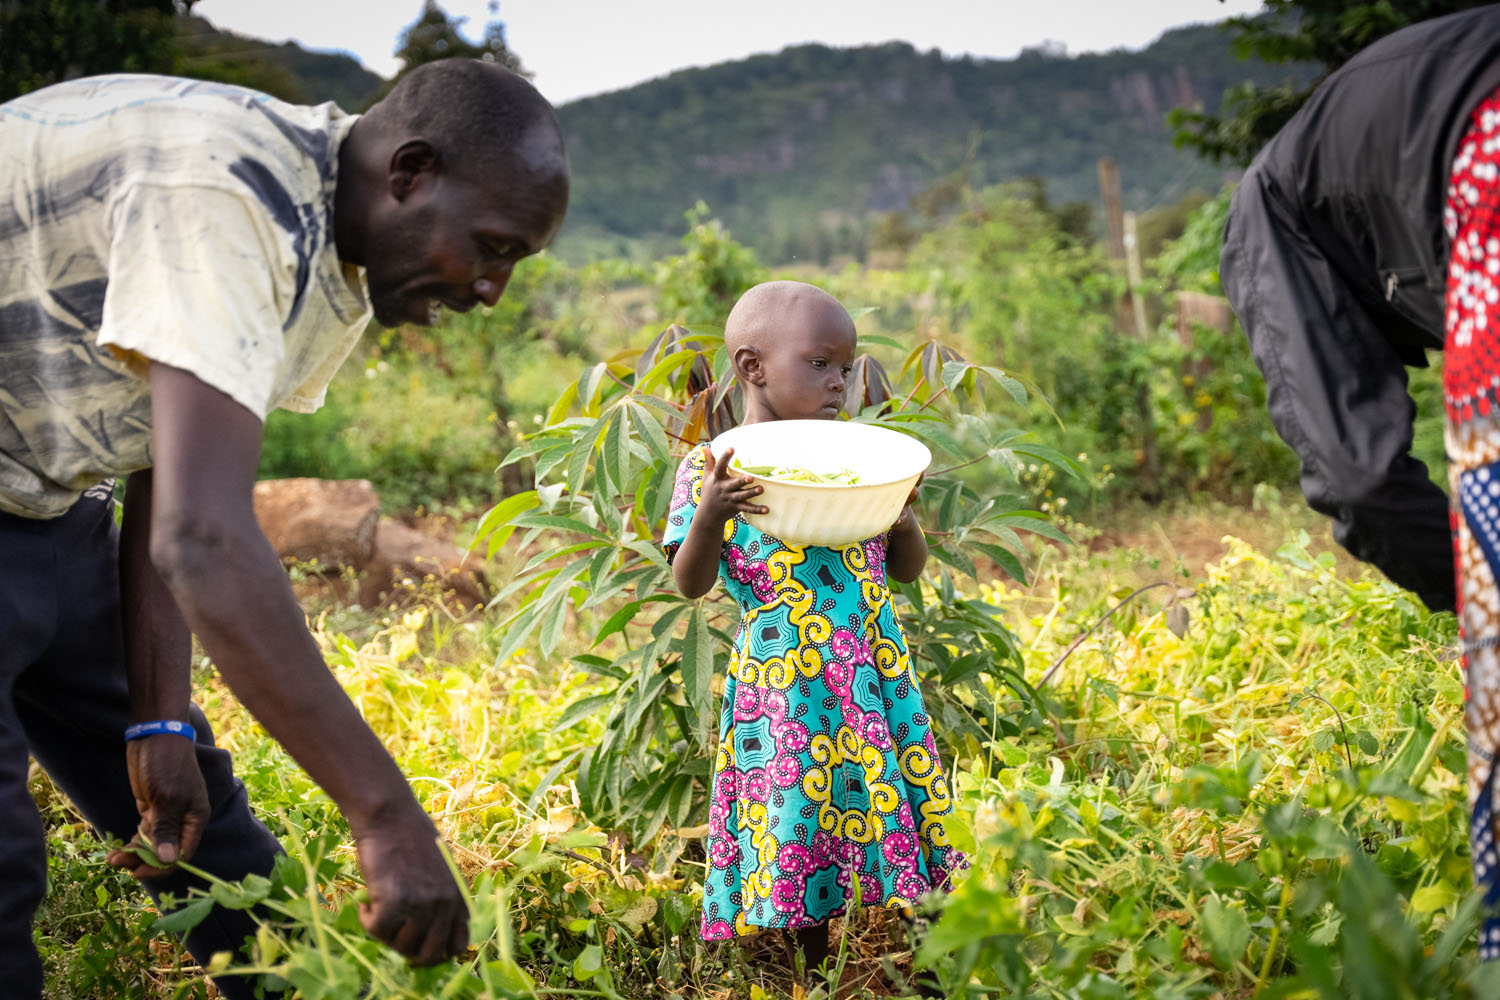 A young Kenyan girl stands between her parents, holding a large bowl, as her parents pick vegetables from their field. 